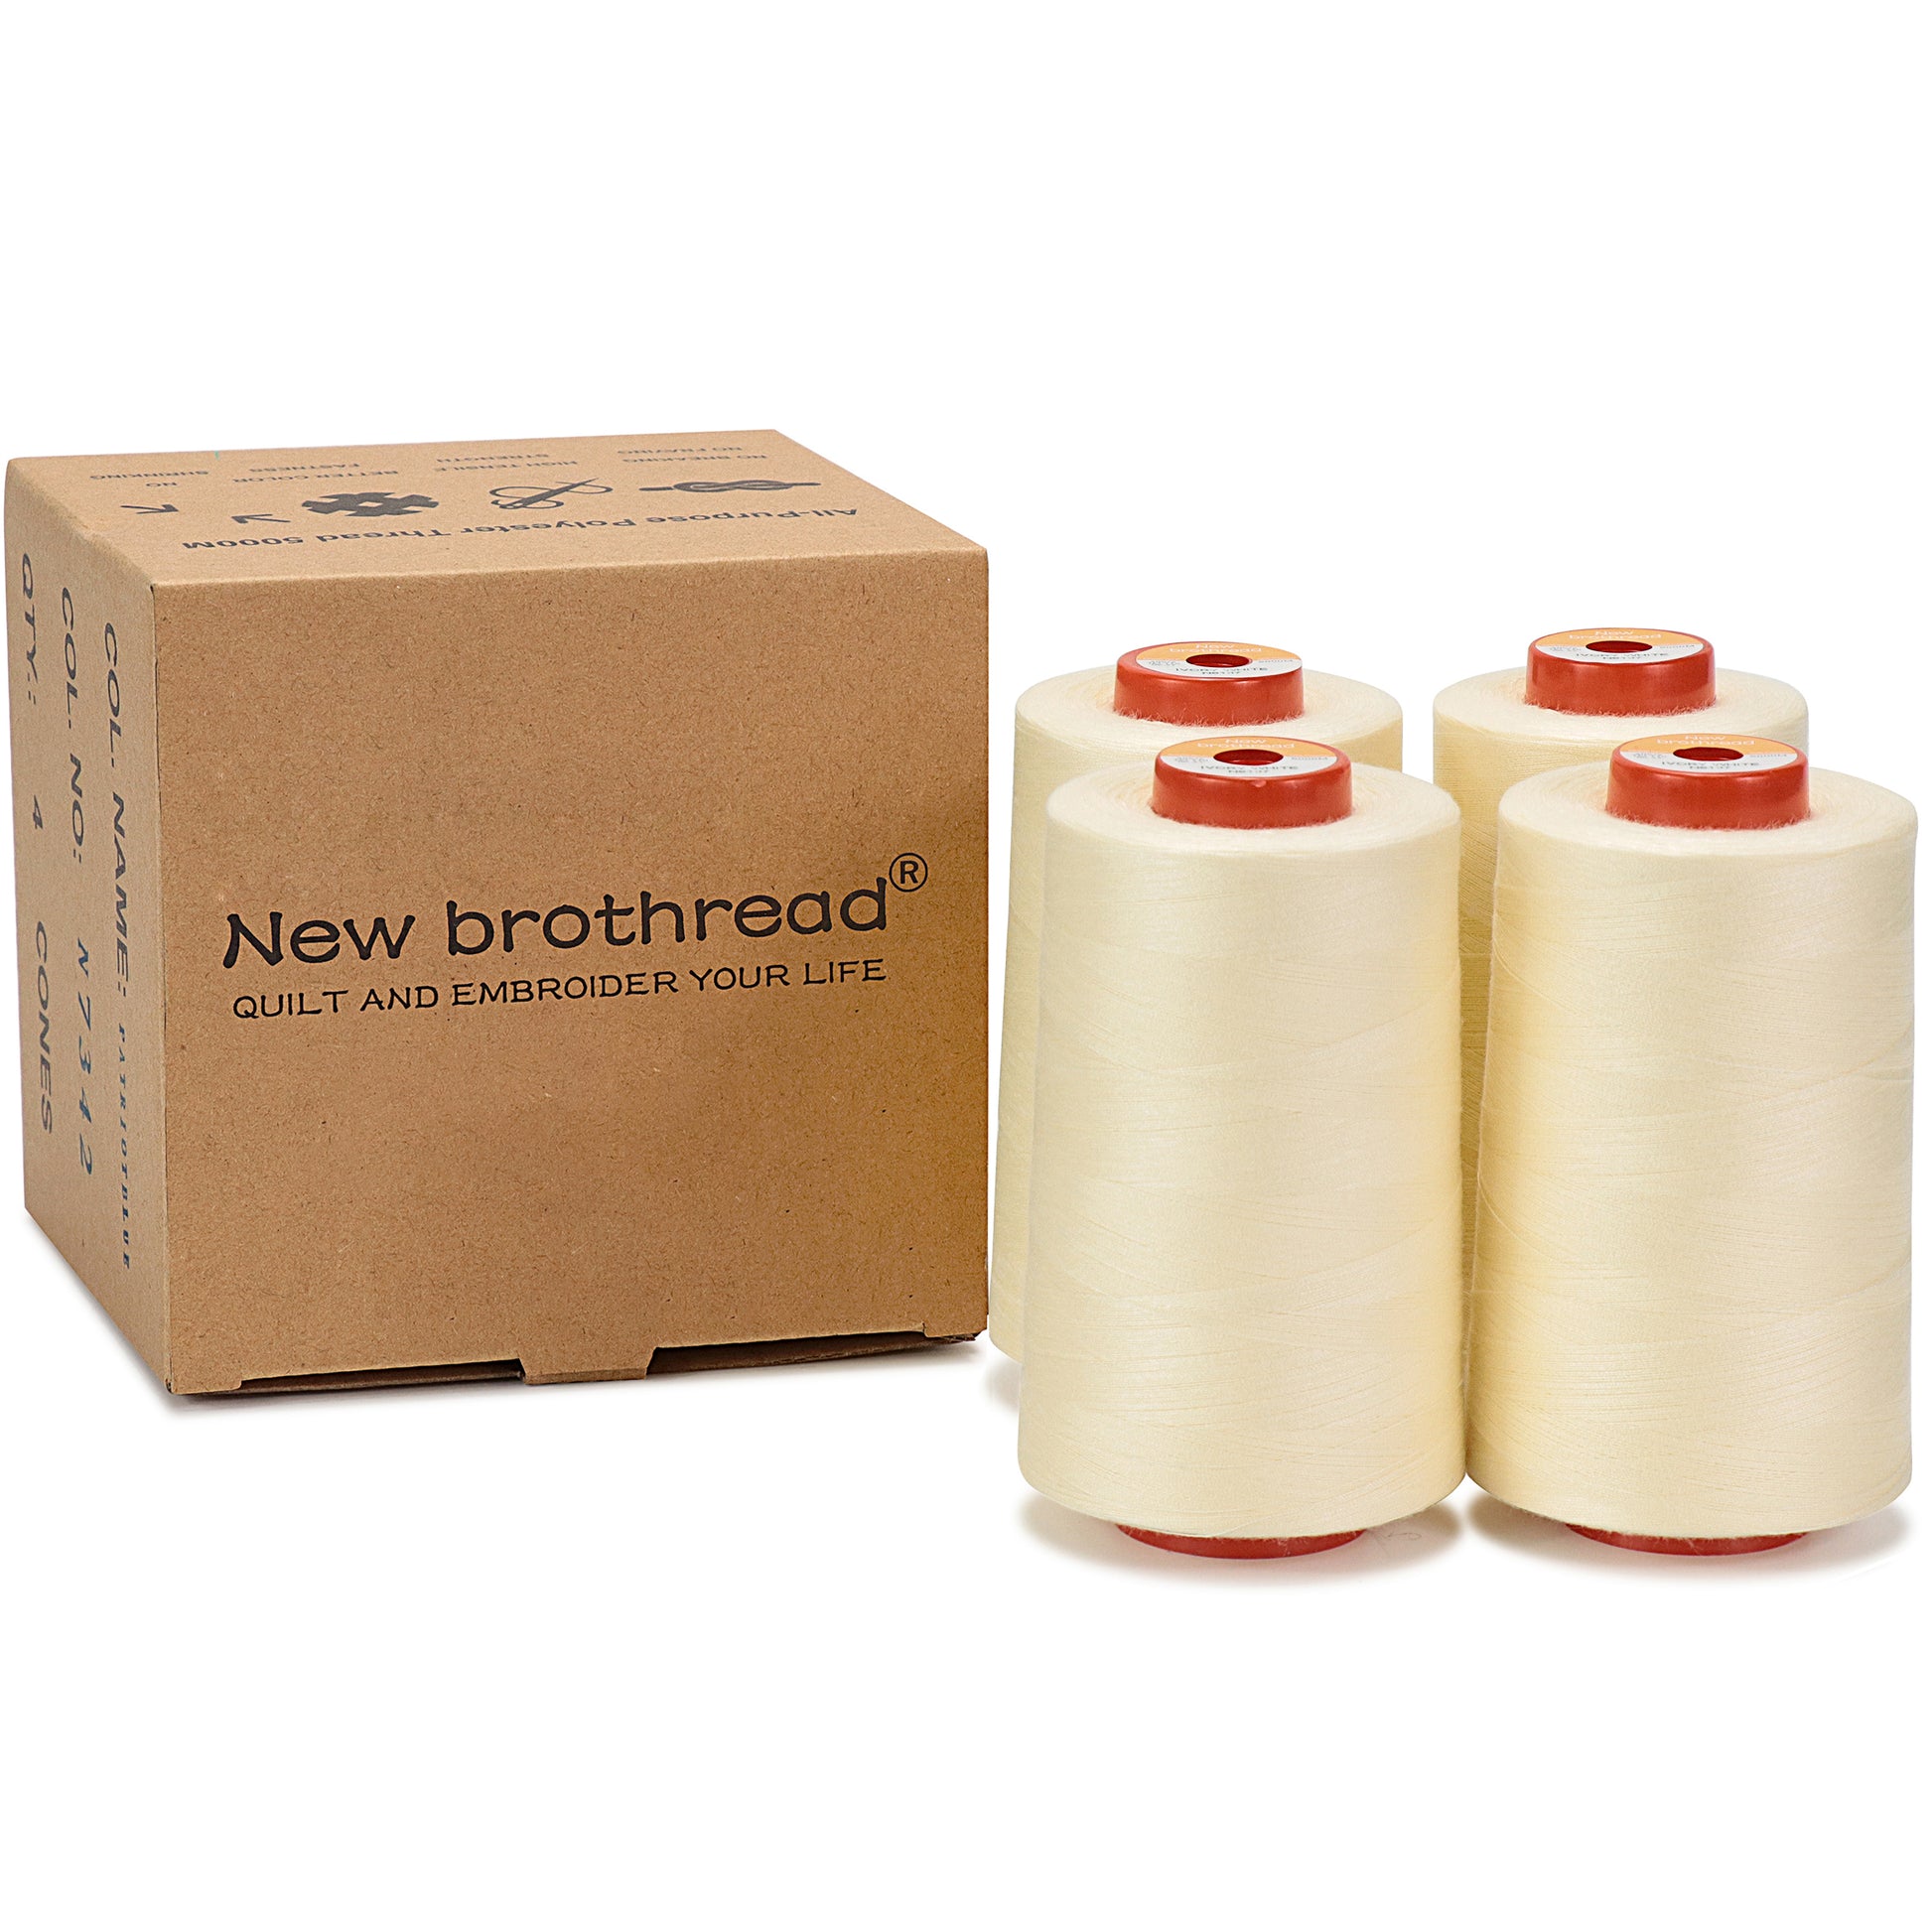 New brothread 100pcs Thread Net Spool Saver for Different Sizes of Embroidery Sewing Quilting and Serger Thread Spools/Cones - 25cm Long Each Piece